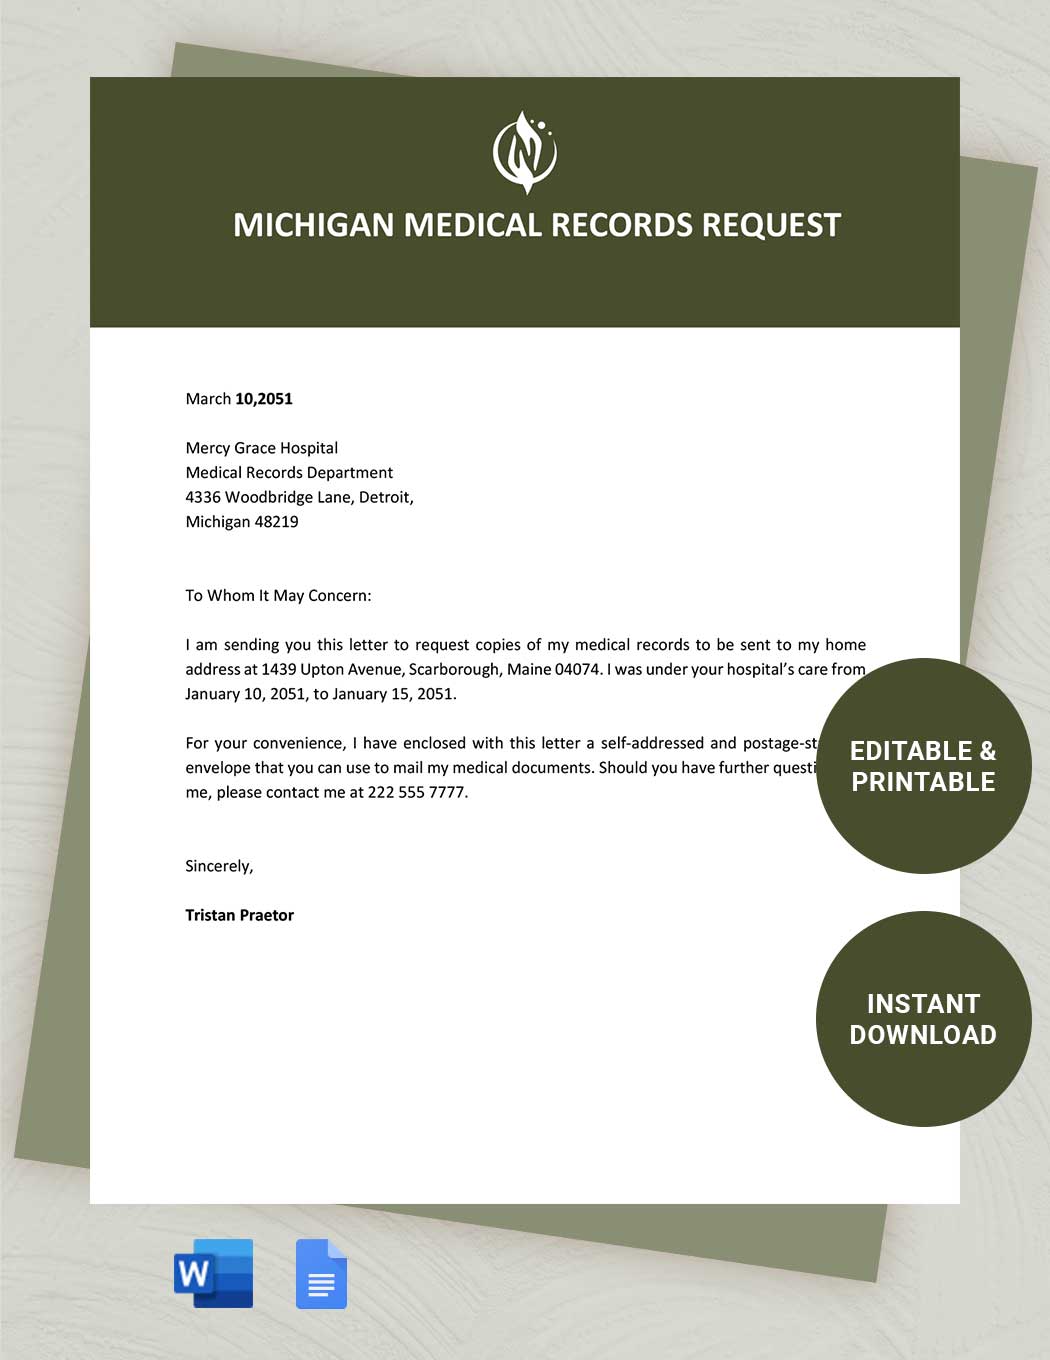 Michigan Medical Records Request Template in Word, Google Docs